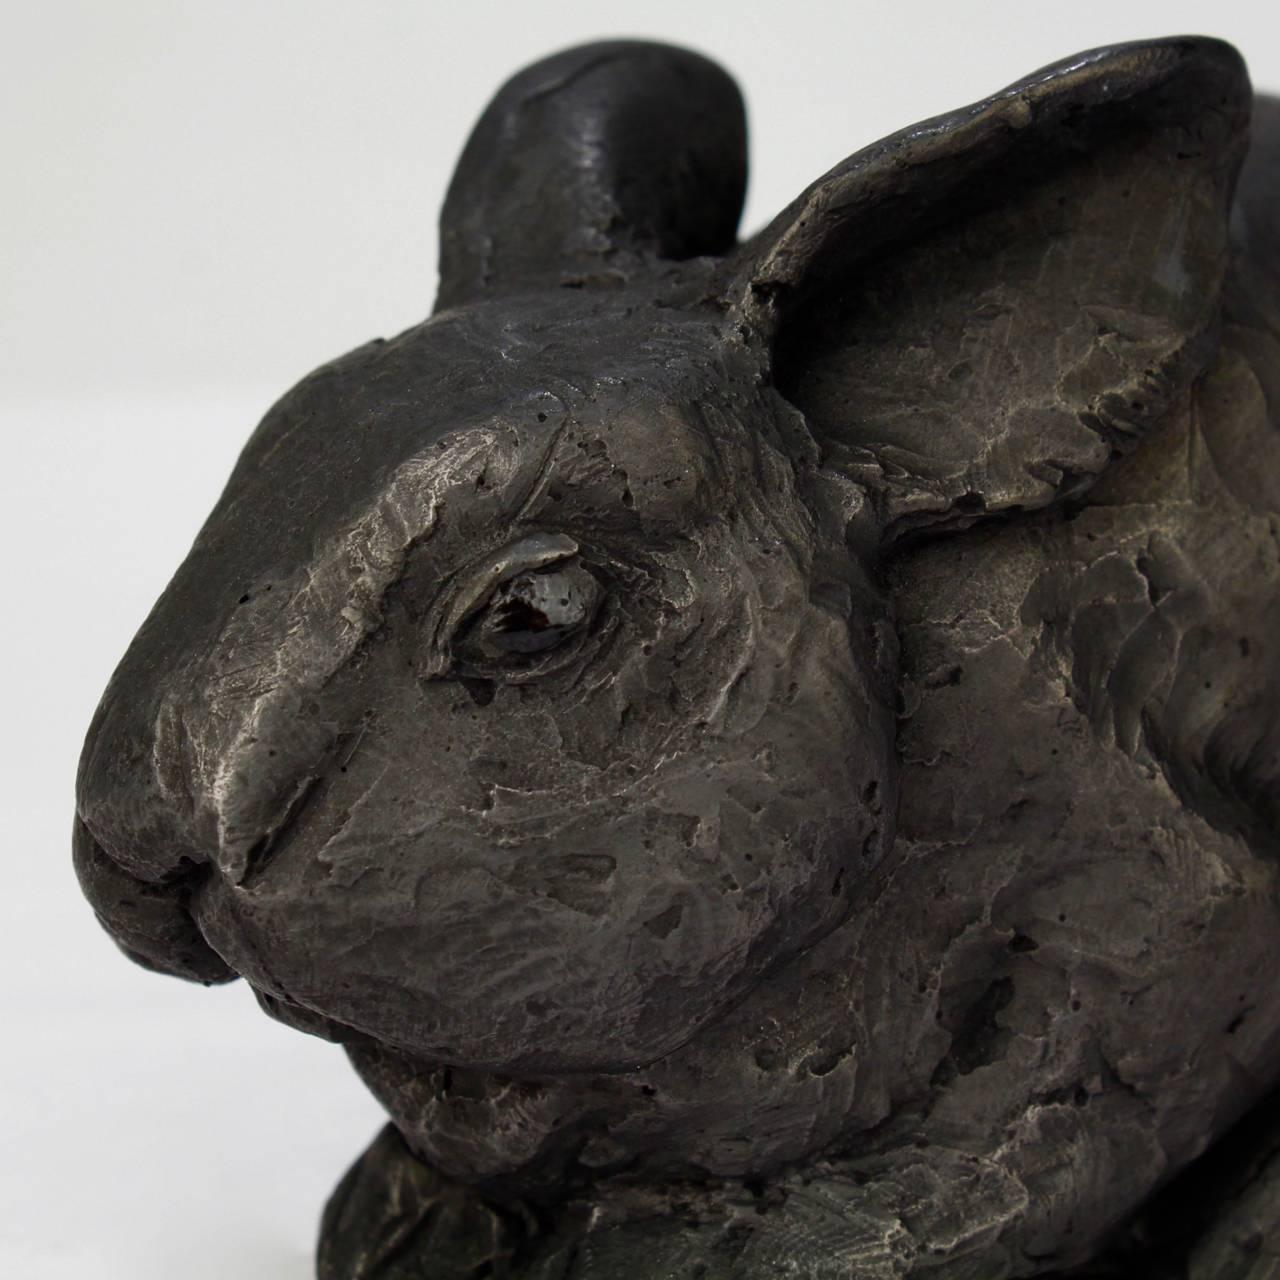 Title: Pygmy rabbit.

A cast black gesso and raw graphite resin sculpture by Darla Jackson.

Date: 2016.

Length: ca. 4 3/4 in.

Also available in bronze on commission basis at $1000. 

Darla Jackson was born in Pennsylvania in 1981. She